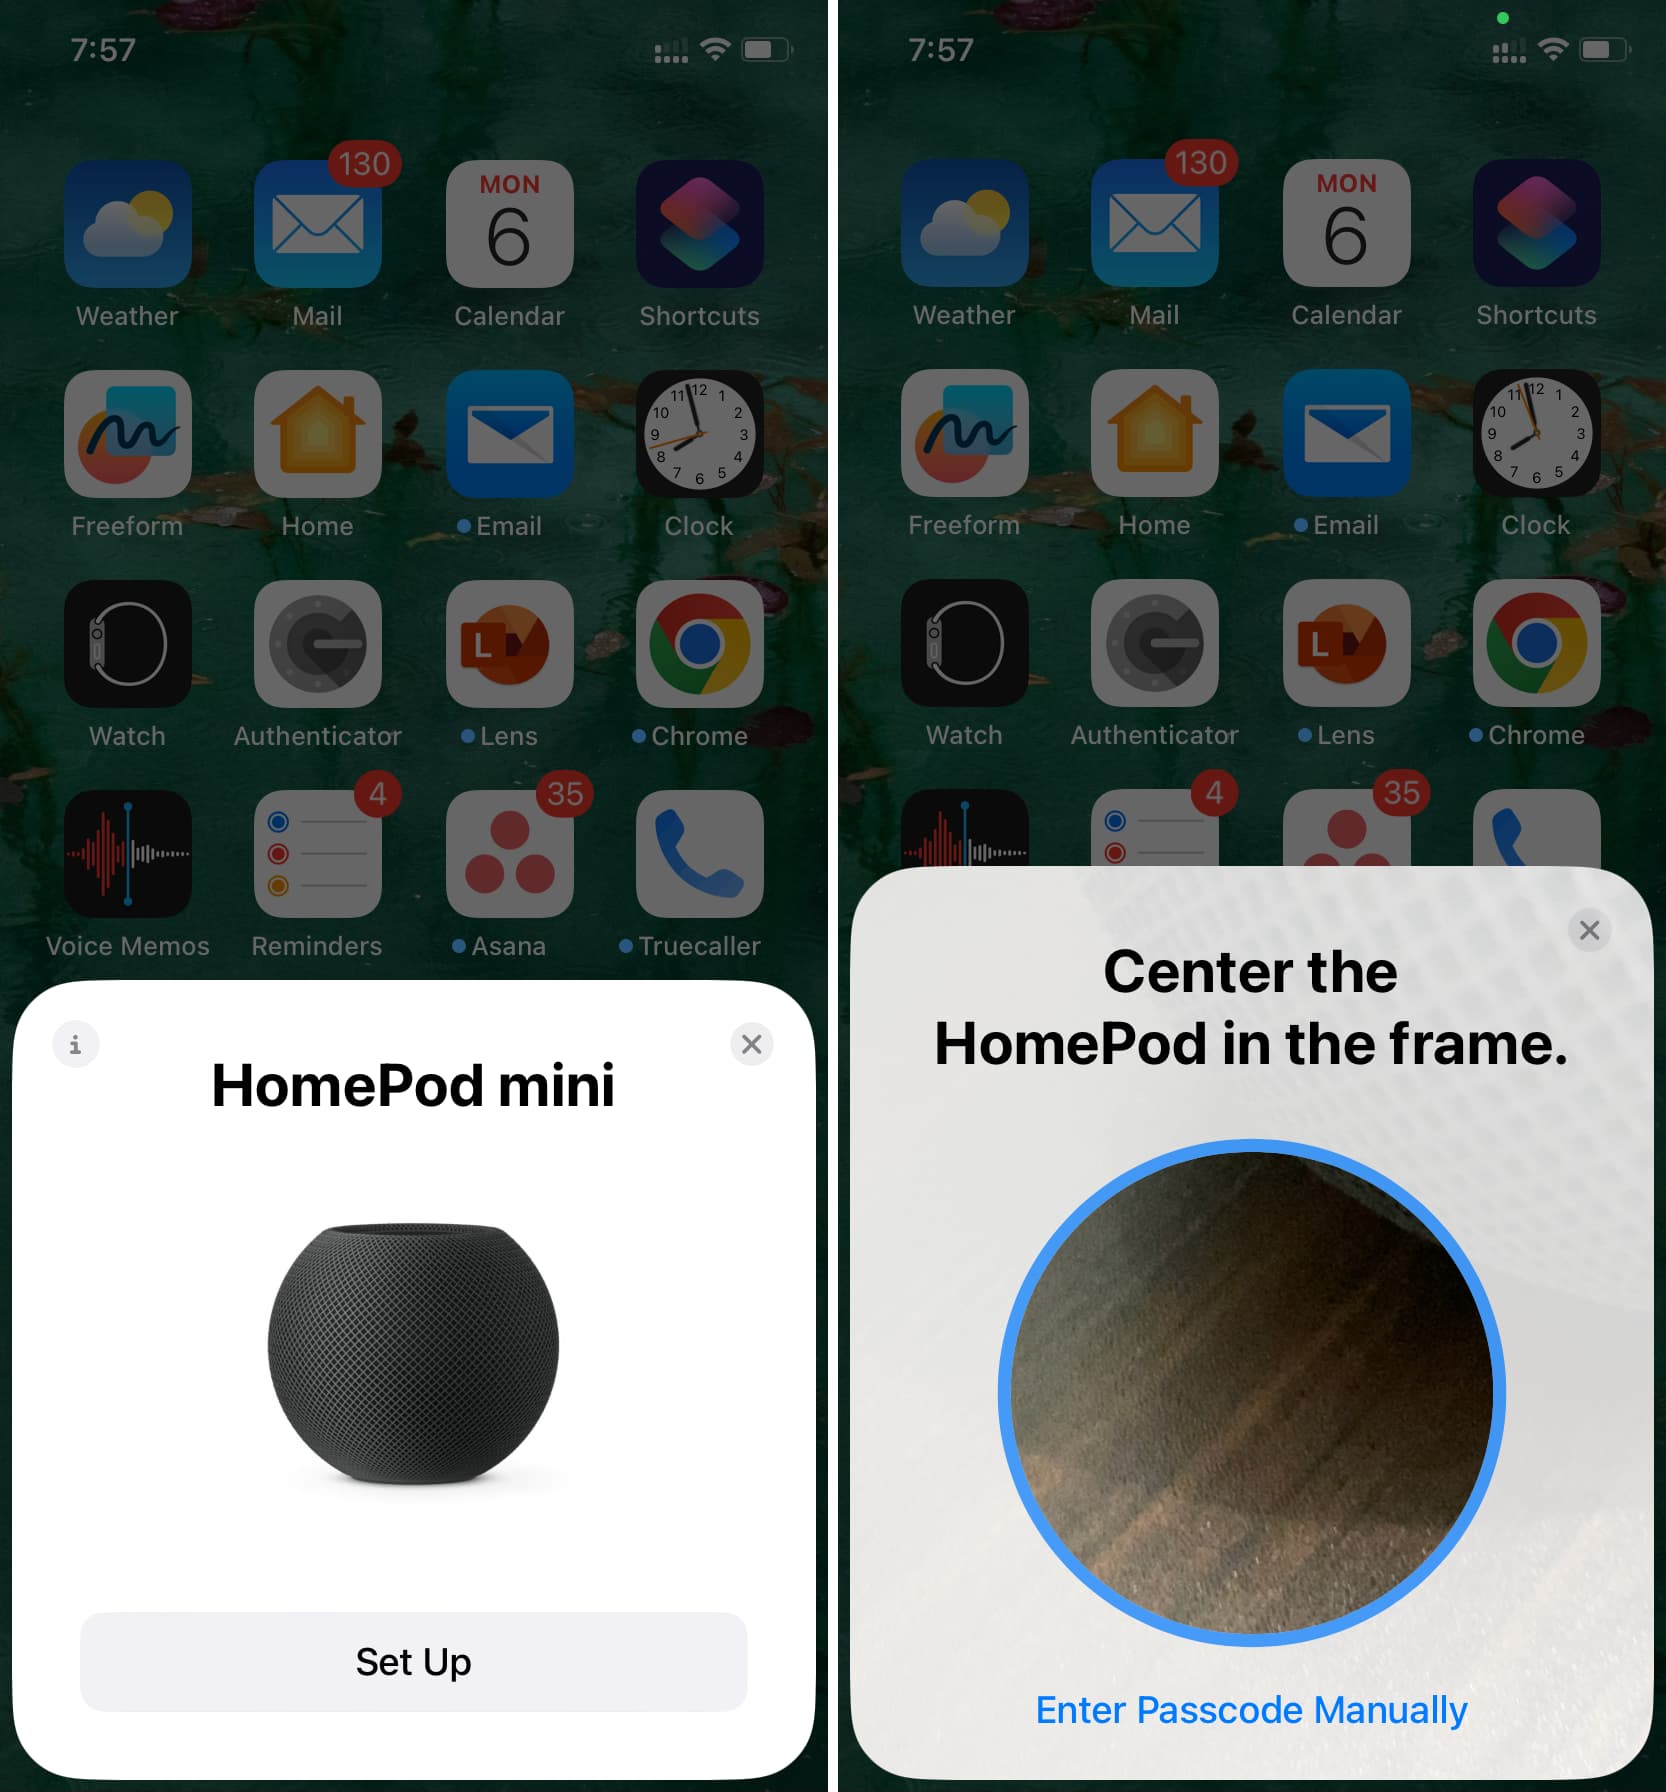 Set up Home by scanning its code or entering code manually